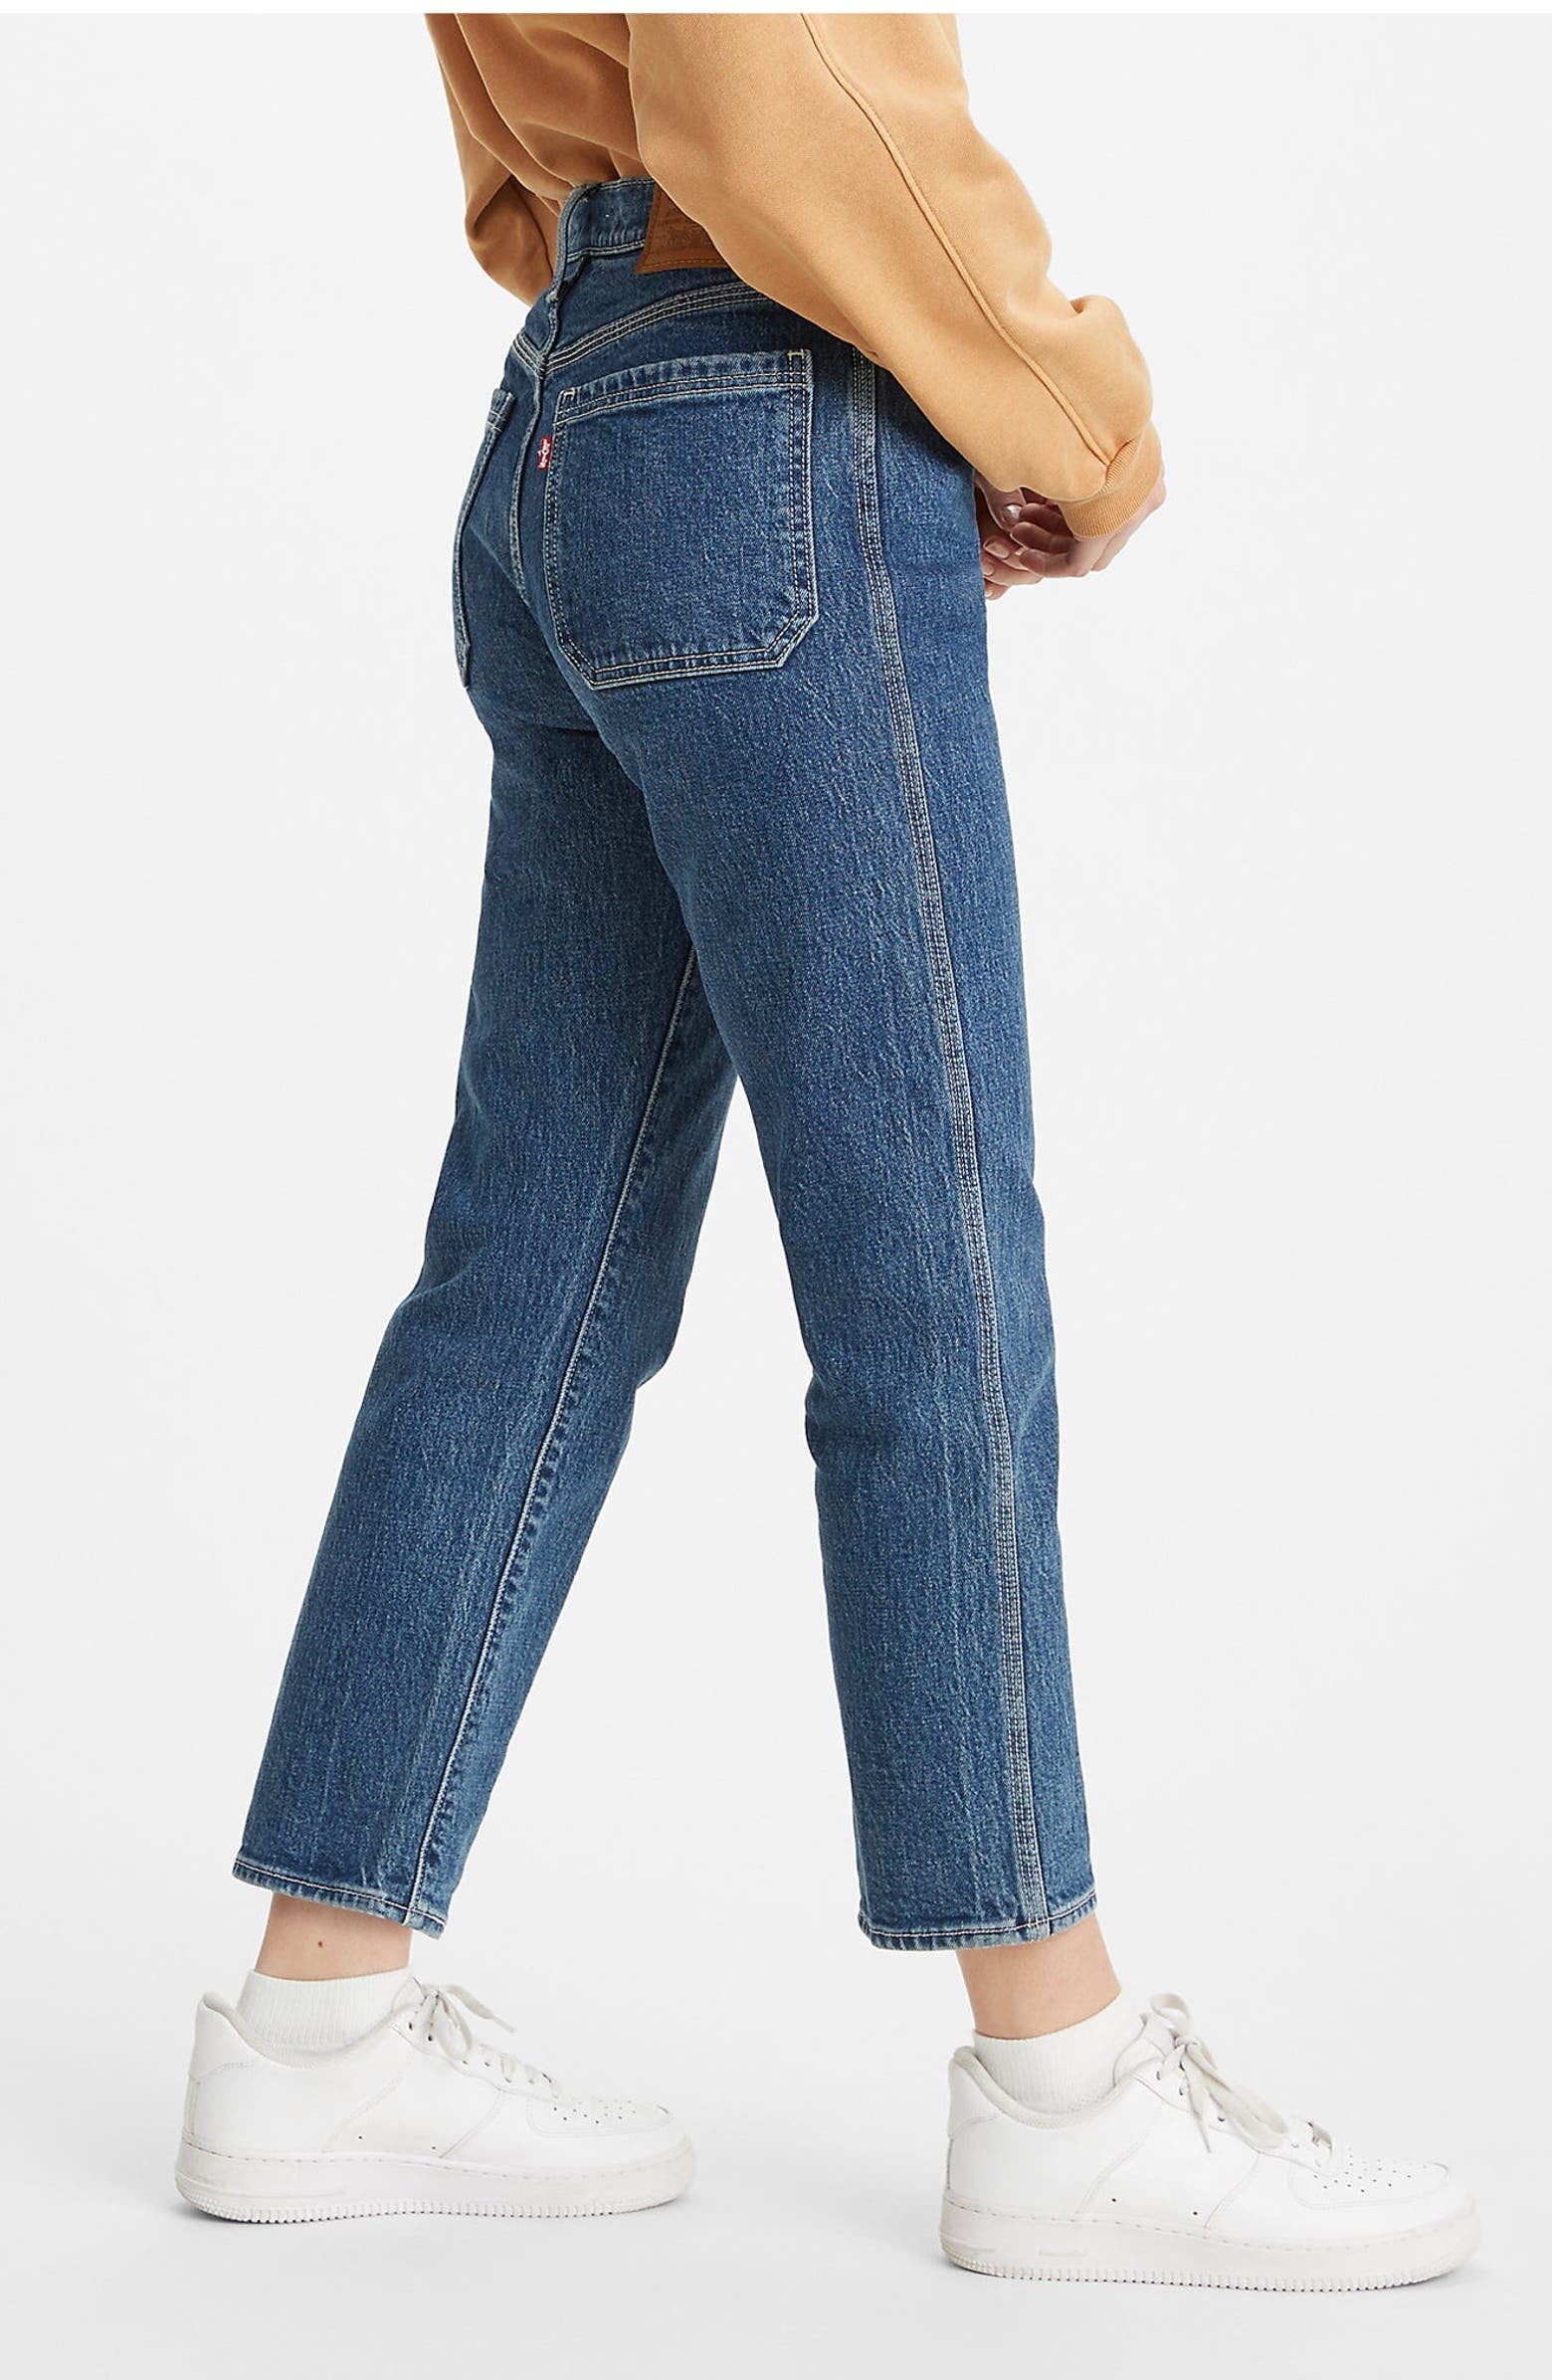 Levi's Wedgie High Waist Crop Straight Leg Jeans | Nordstrom's Big Spring  Sale Is Here! Hurry and Shop Our 100+ Favorite Deals | POPSUGAR Fashion  Photo 23